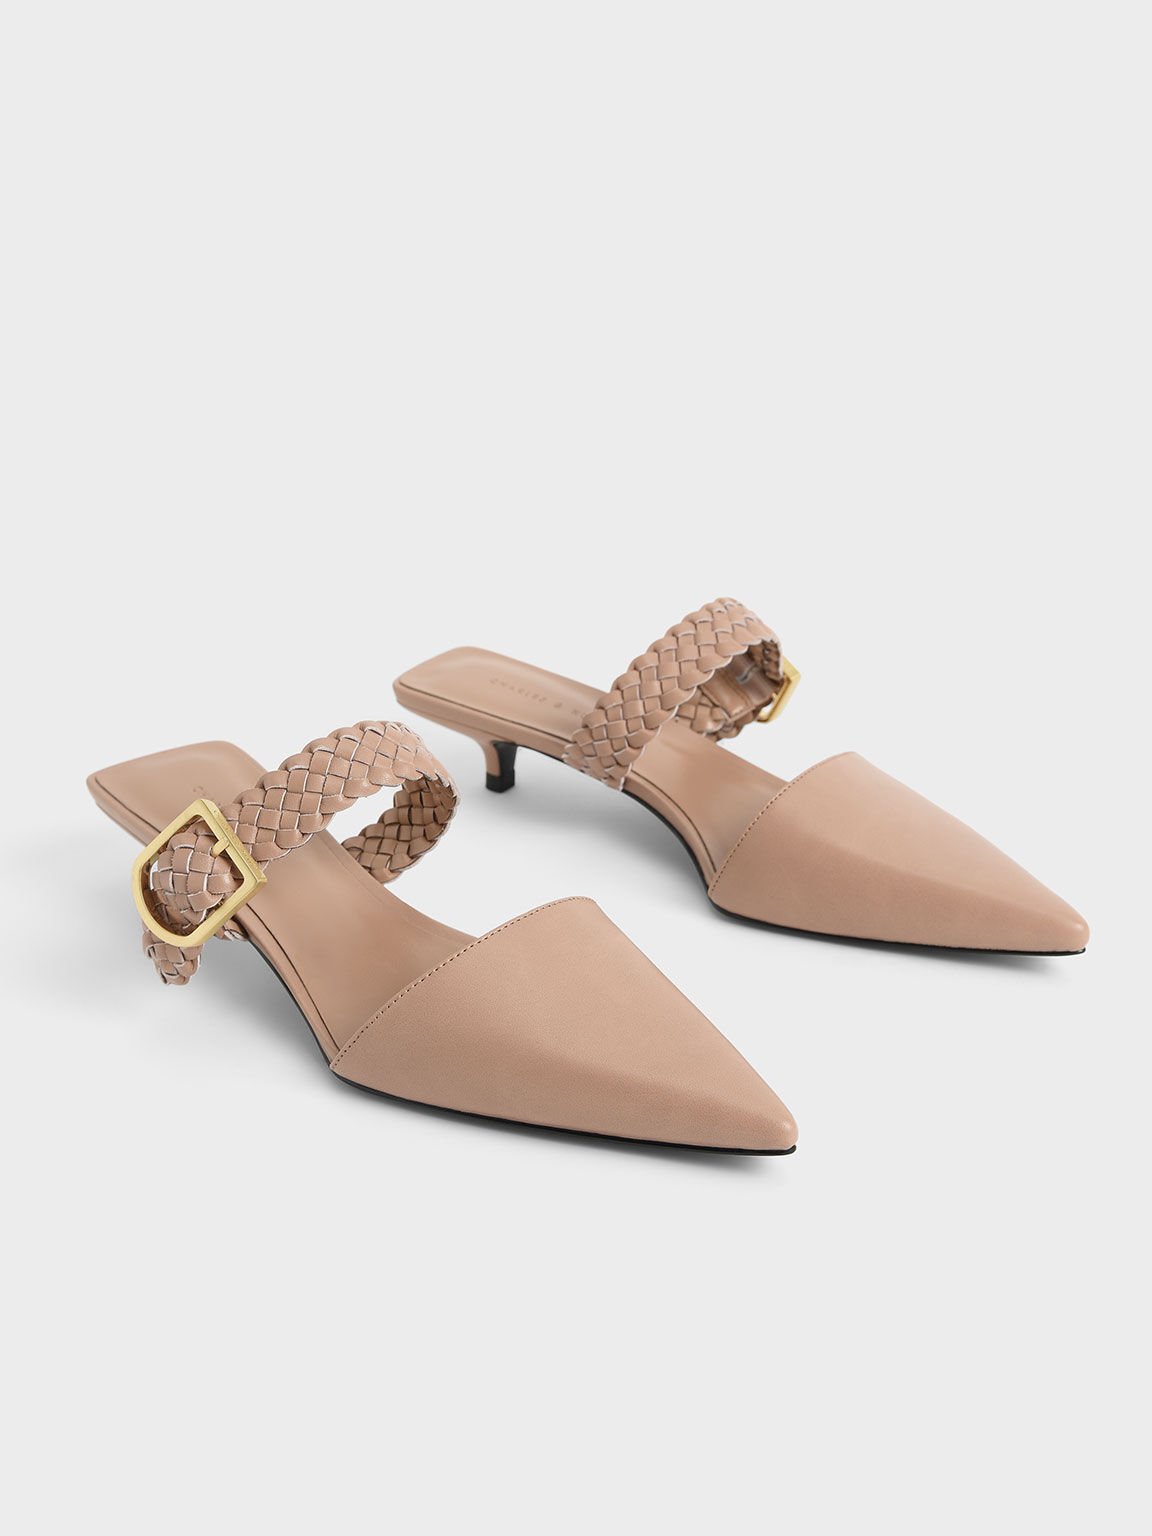 Woven Buckle Strap Mules, Pink, hi-res